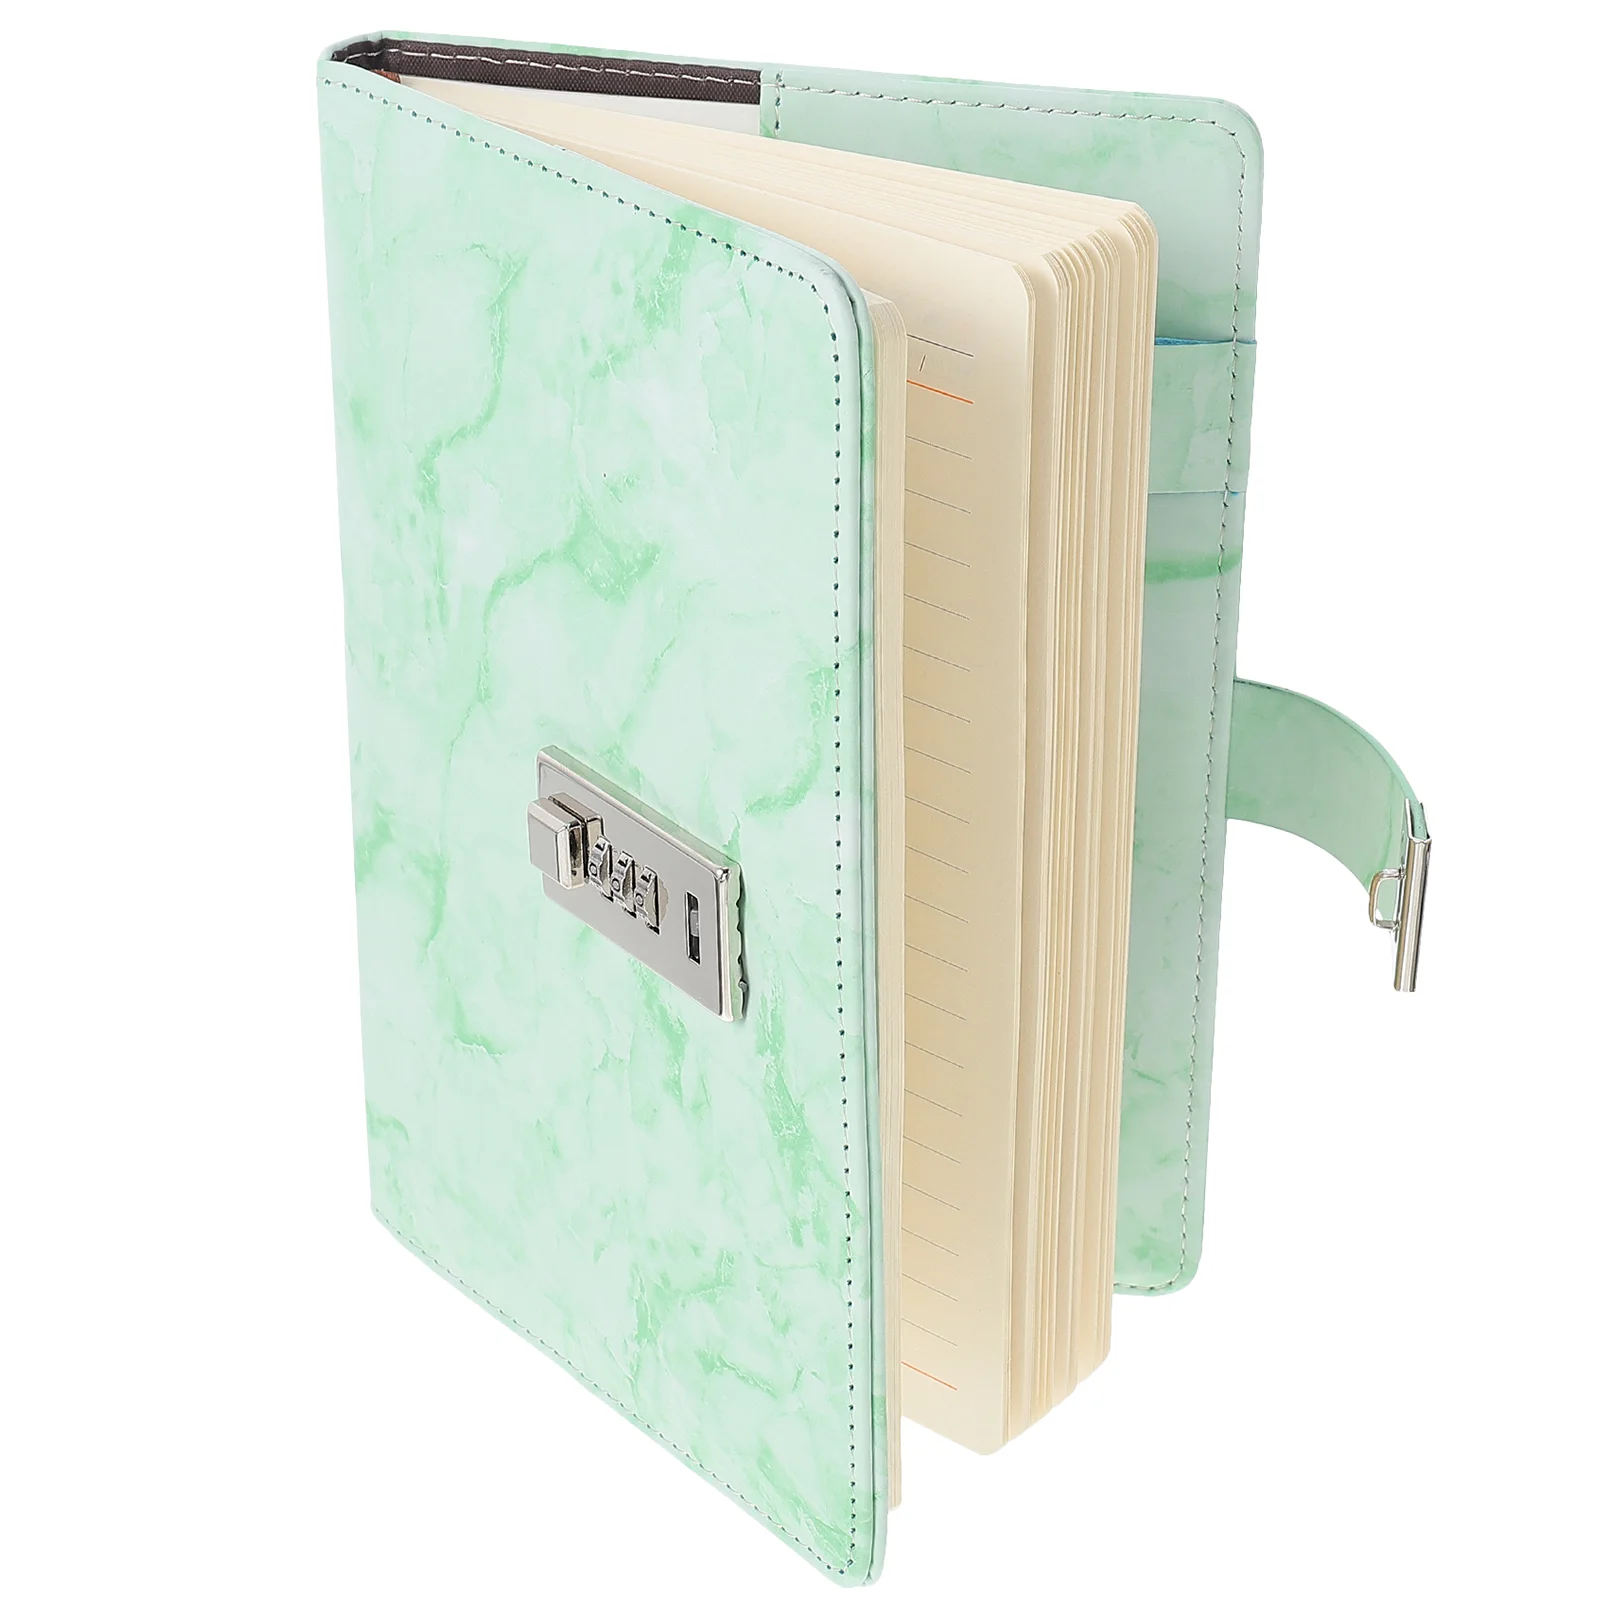 

Password Notebook Notebook With Lock Accessory Supply Household Delicate Diary Write Multi-function Lock Portable Diary Book